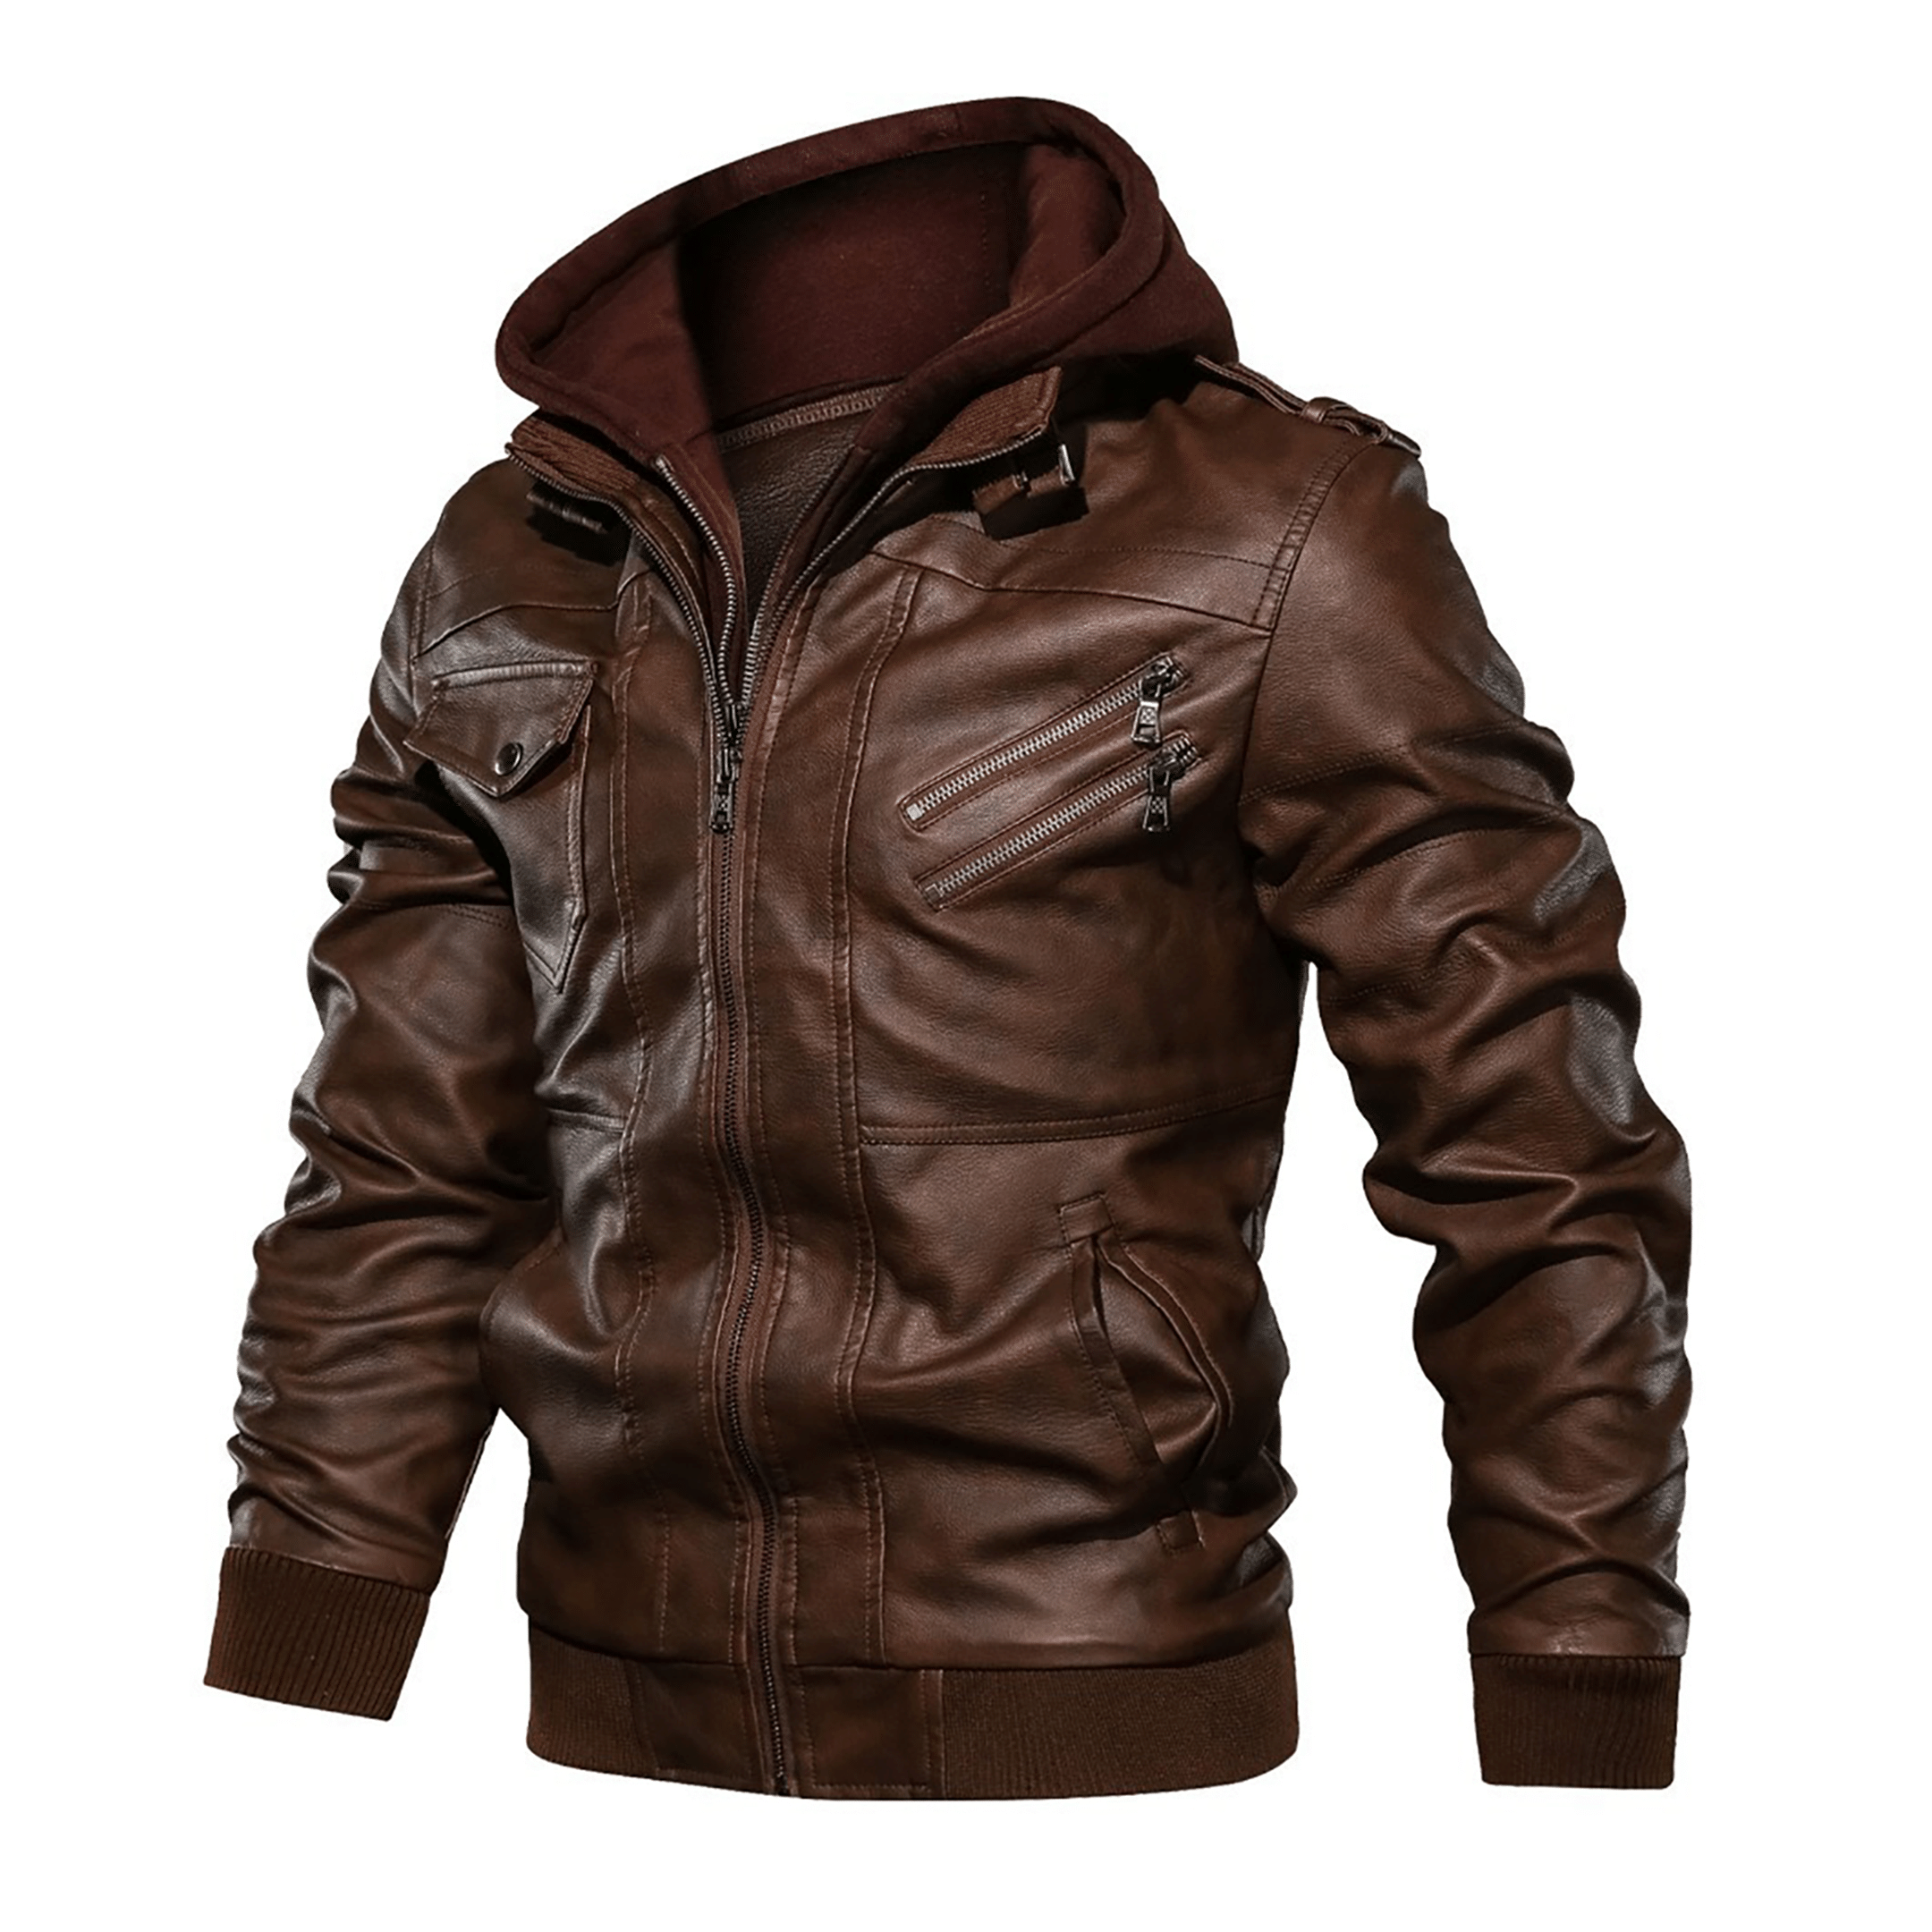 Top leather jackets and latest products 339